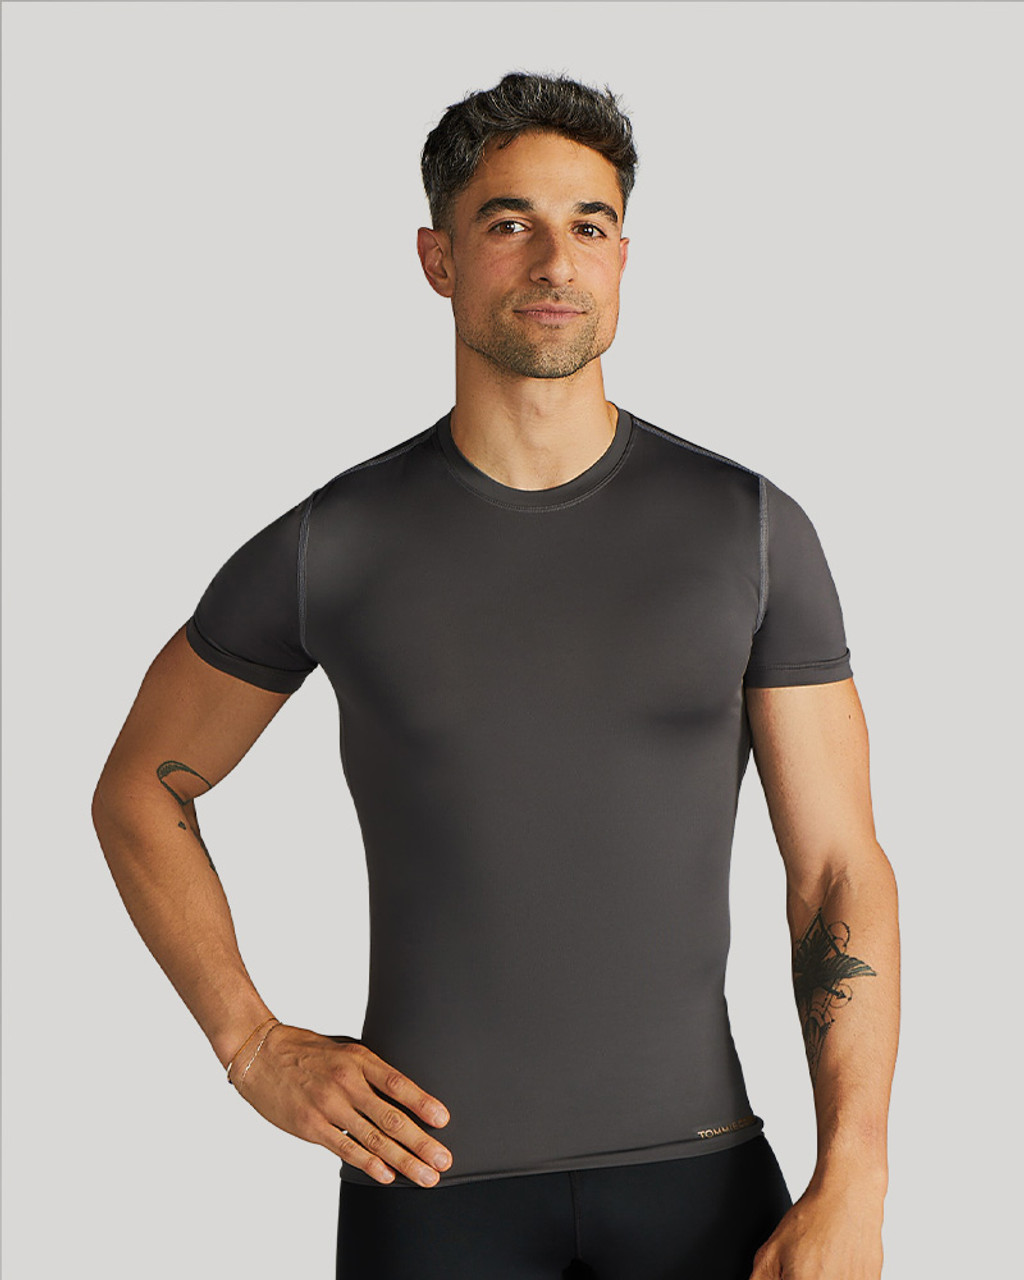 Reviews for COPPER FIT Large/X-Large Black Copper Infused Crew